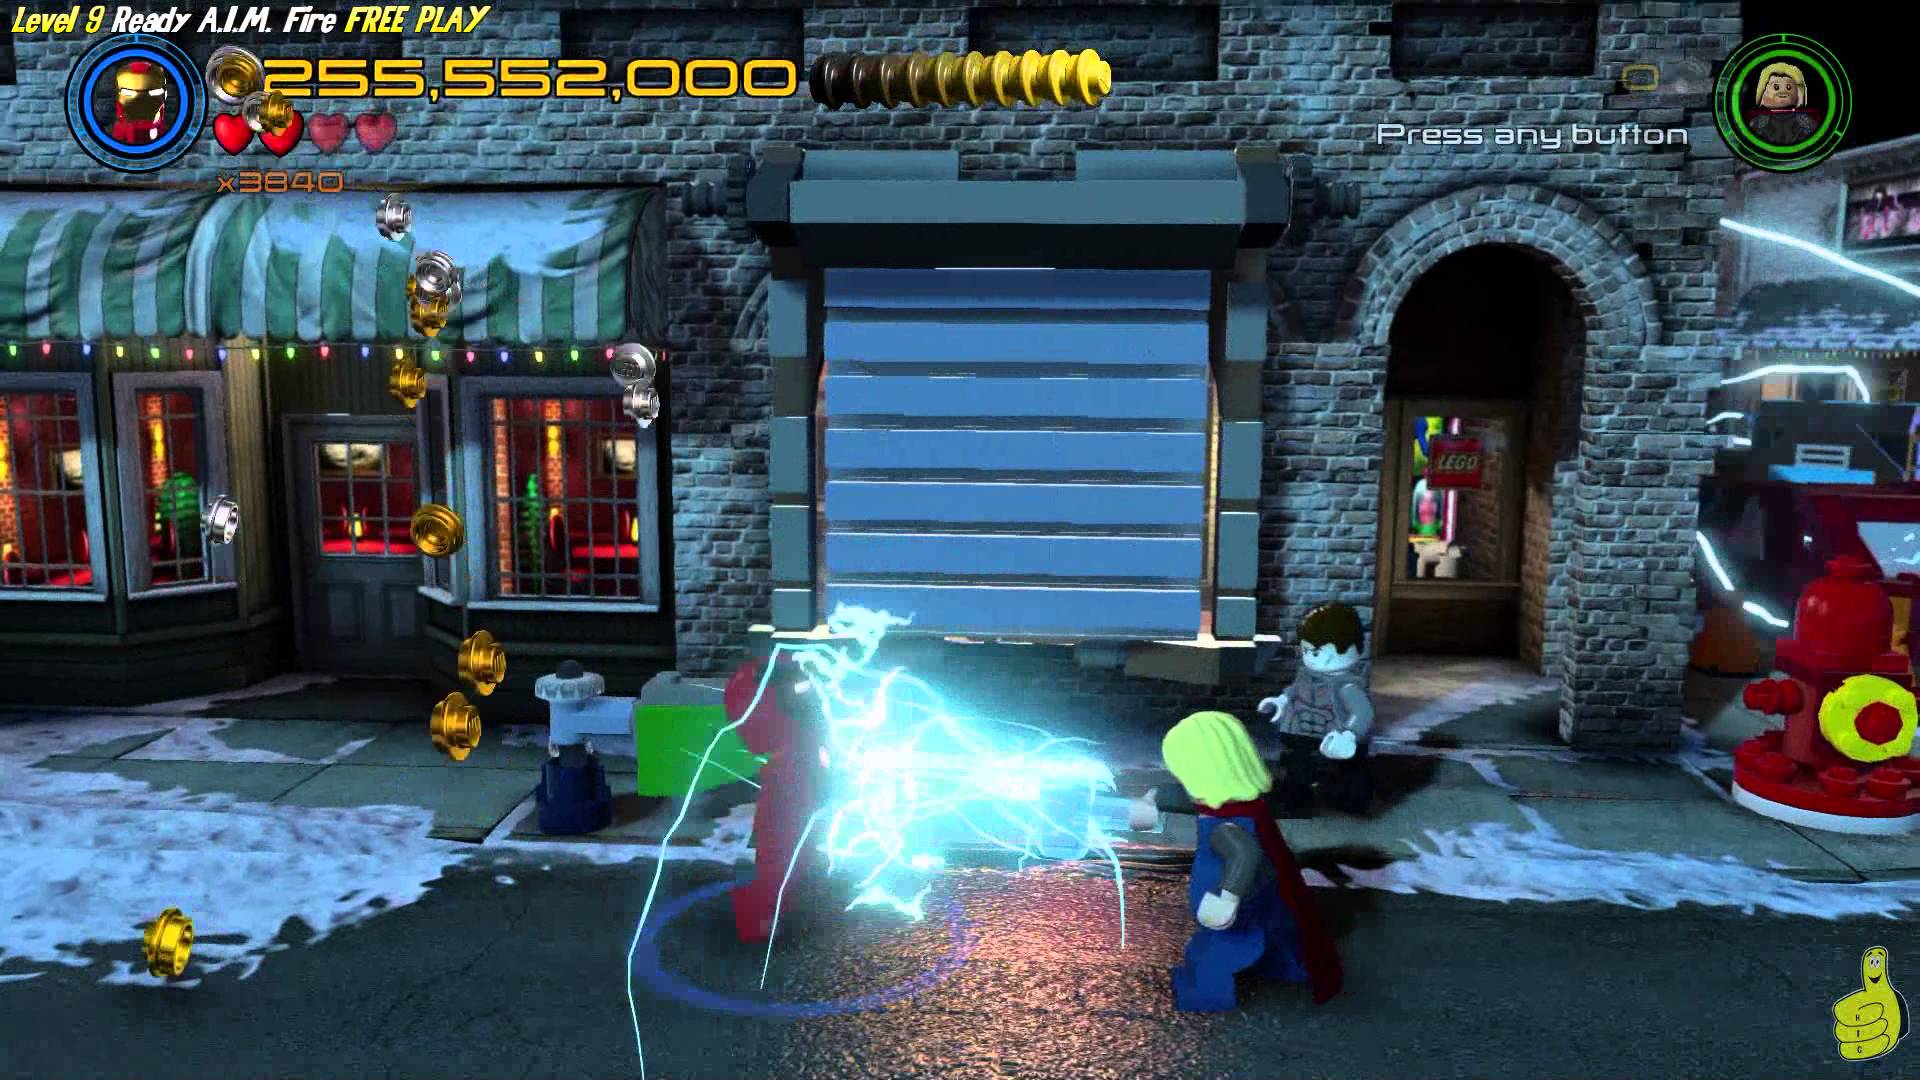 Lego Marvel Avengers: Lvl 9 / Ready A.I.M. Fire FREE PLAY (All Collectibles) – HTG